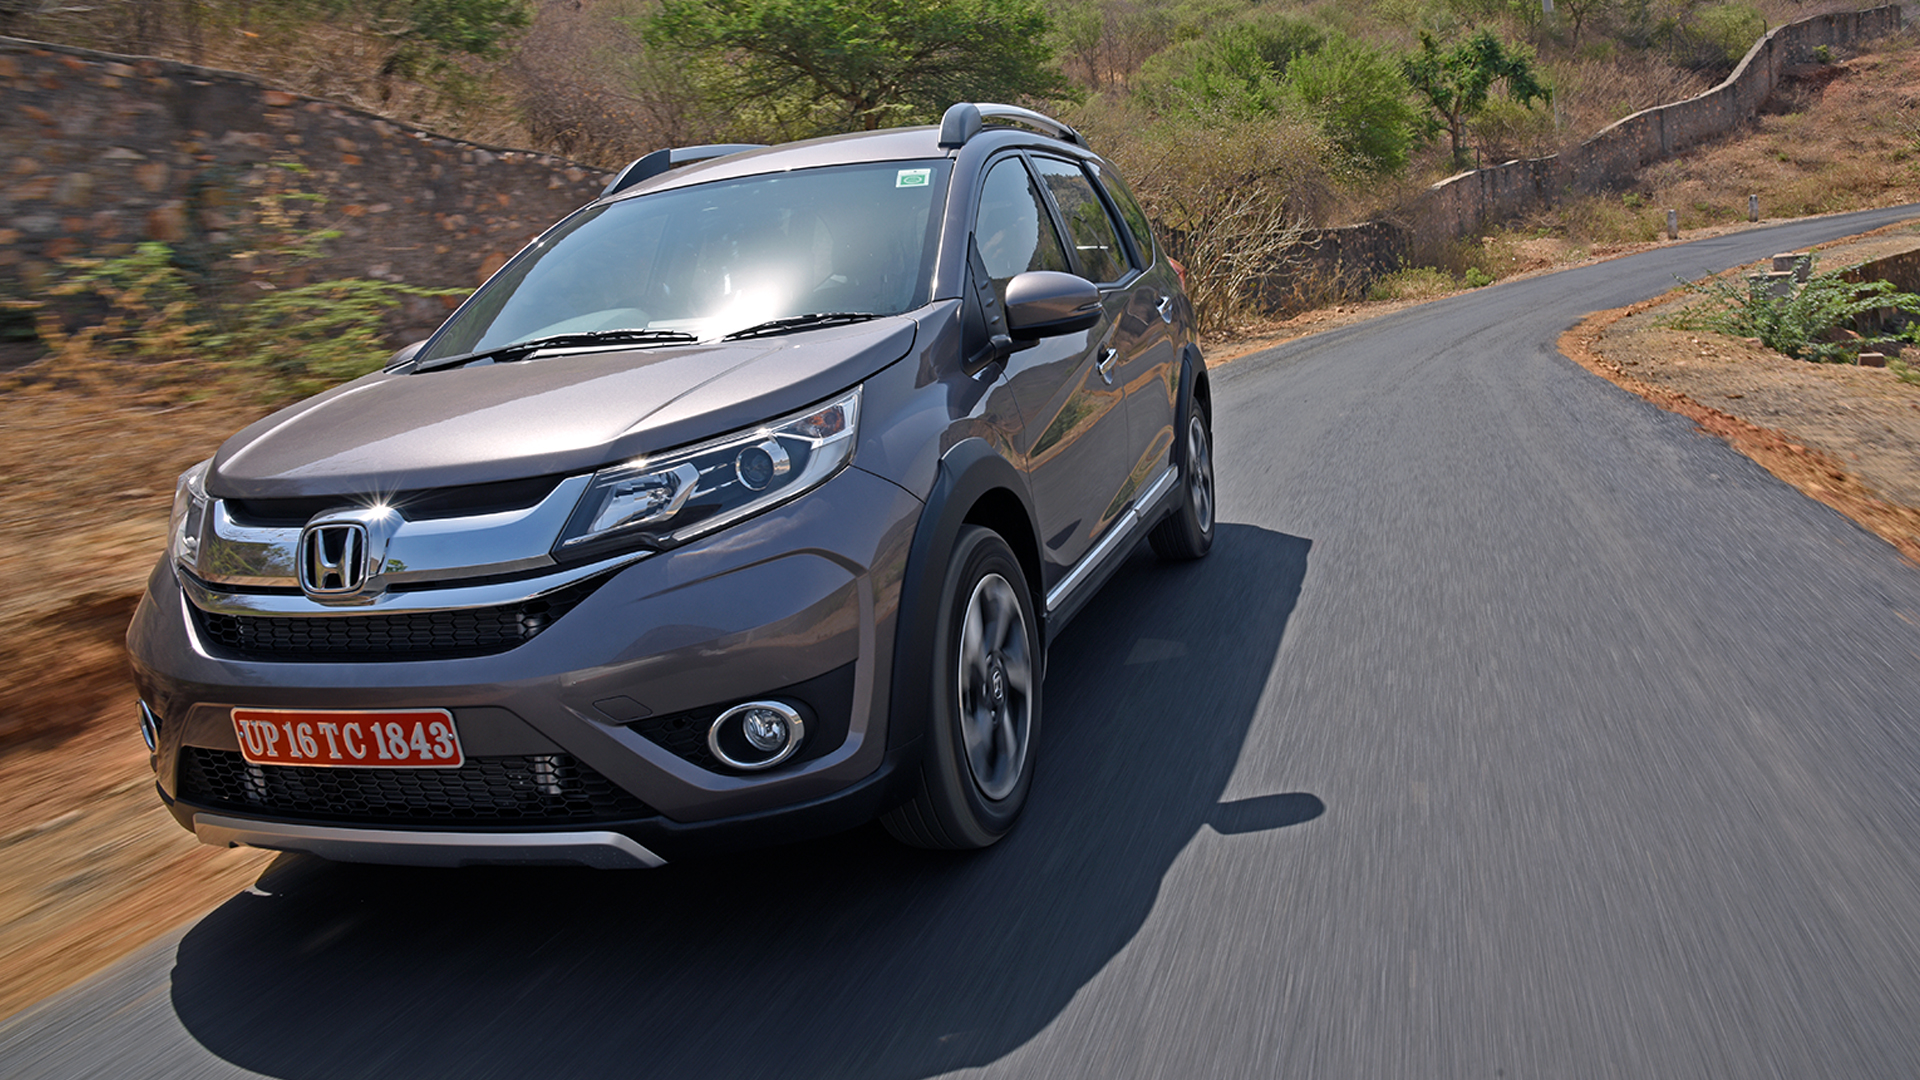 Honda BR-V 2016 S Diesel - Price in India, Mileage, Reviews, Colours,  Specification, Images - Overdrive